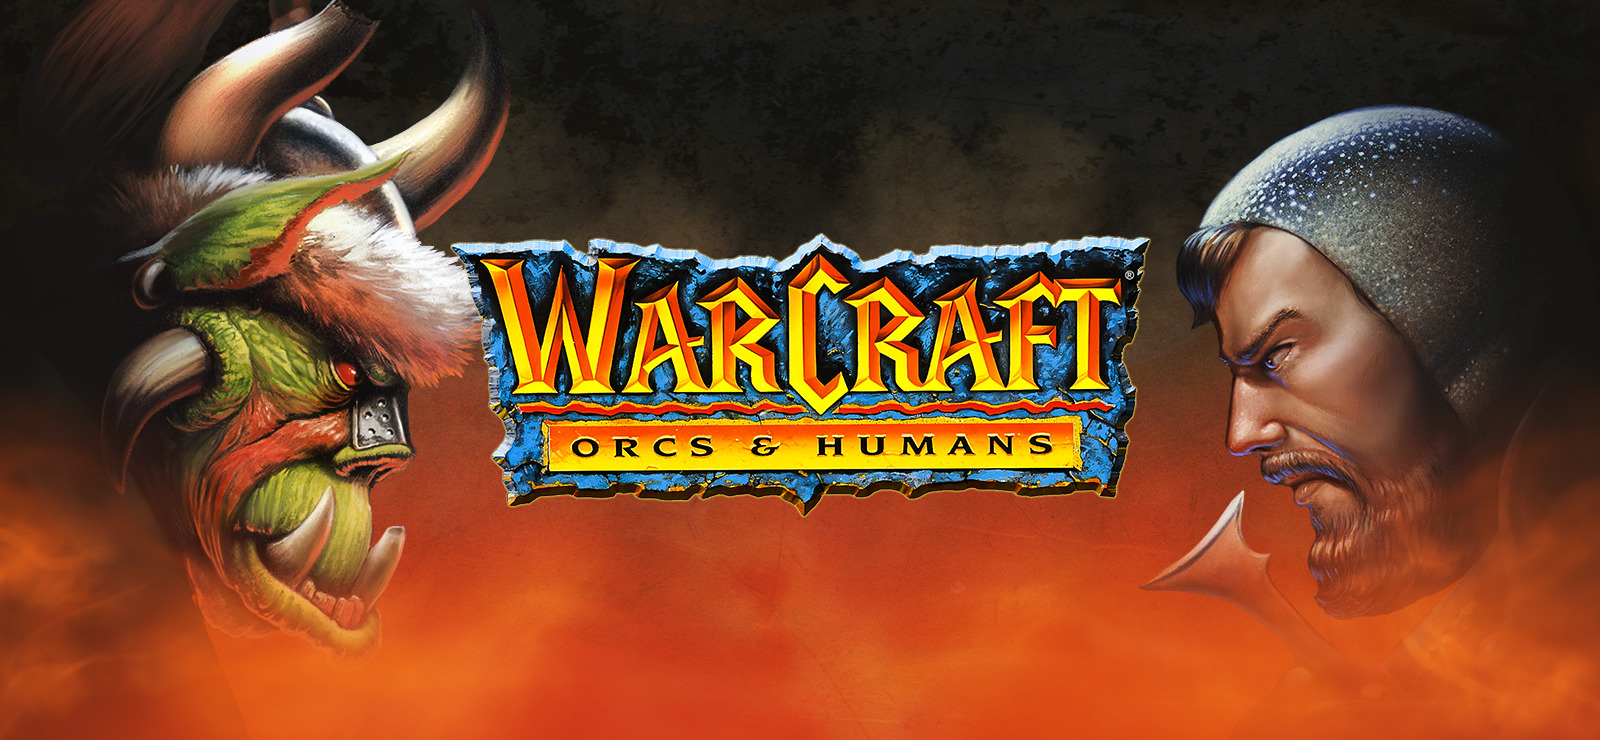 download warcraft orcs and humans full version free mac